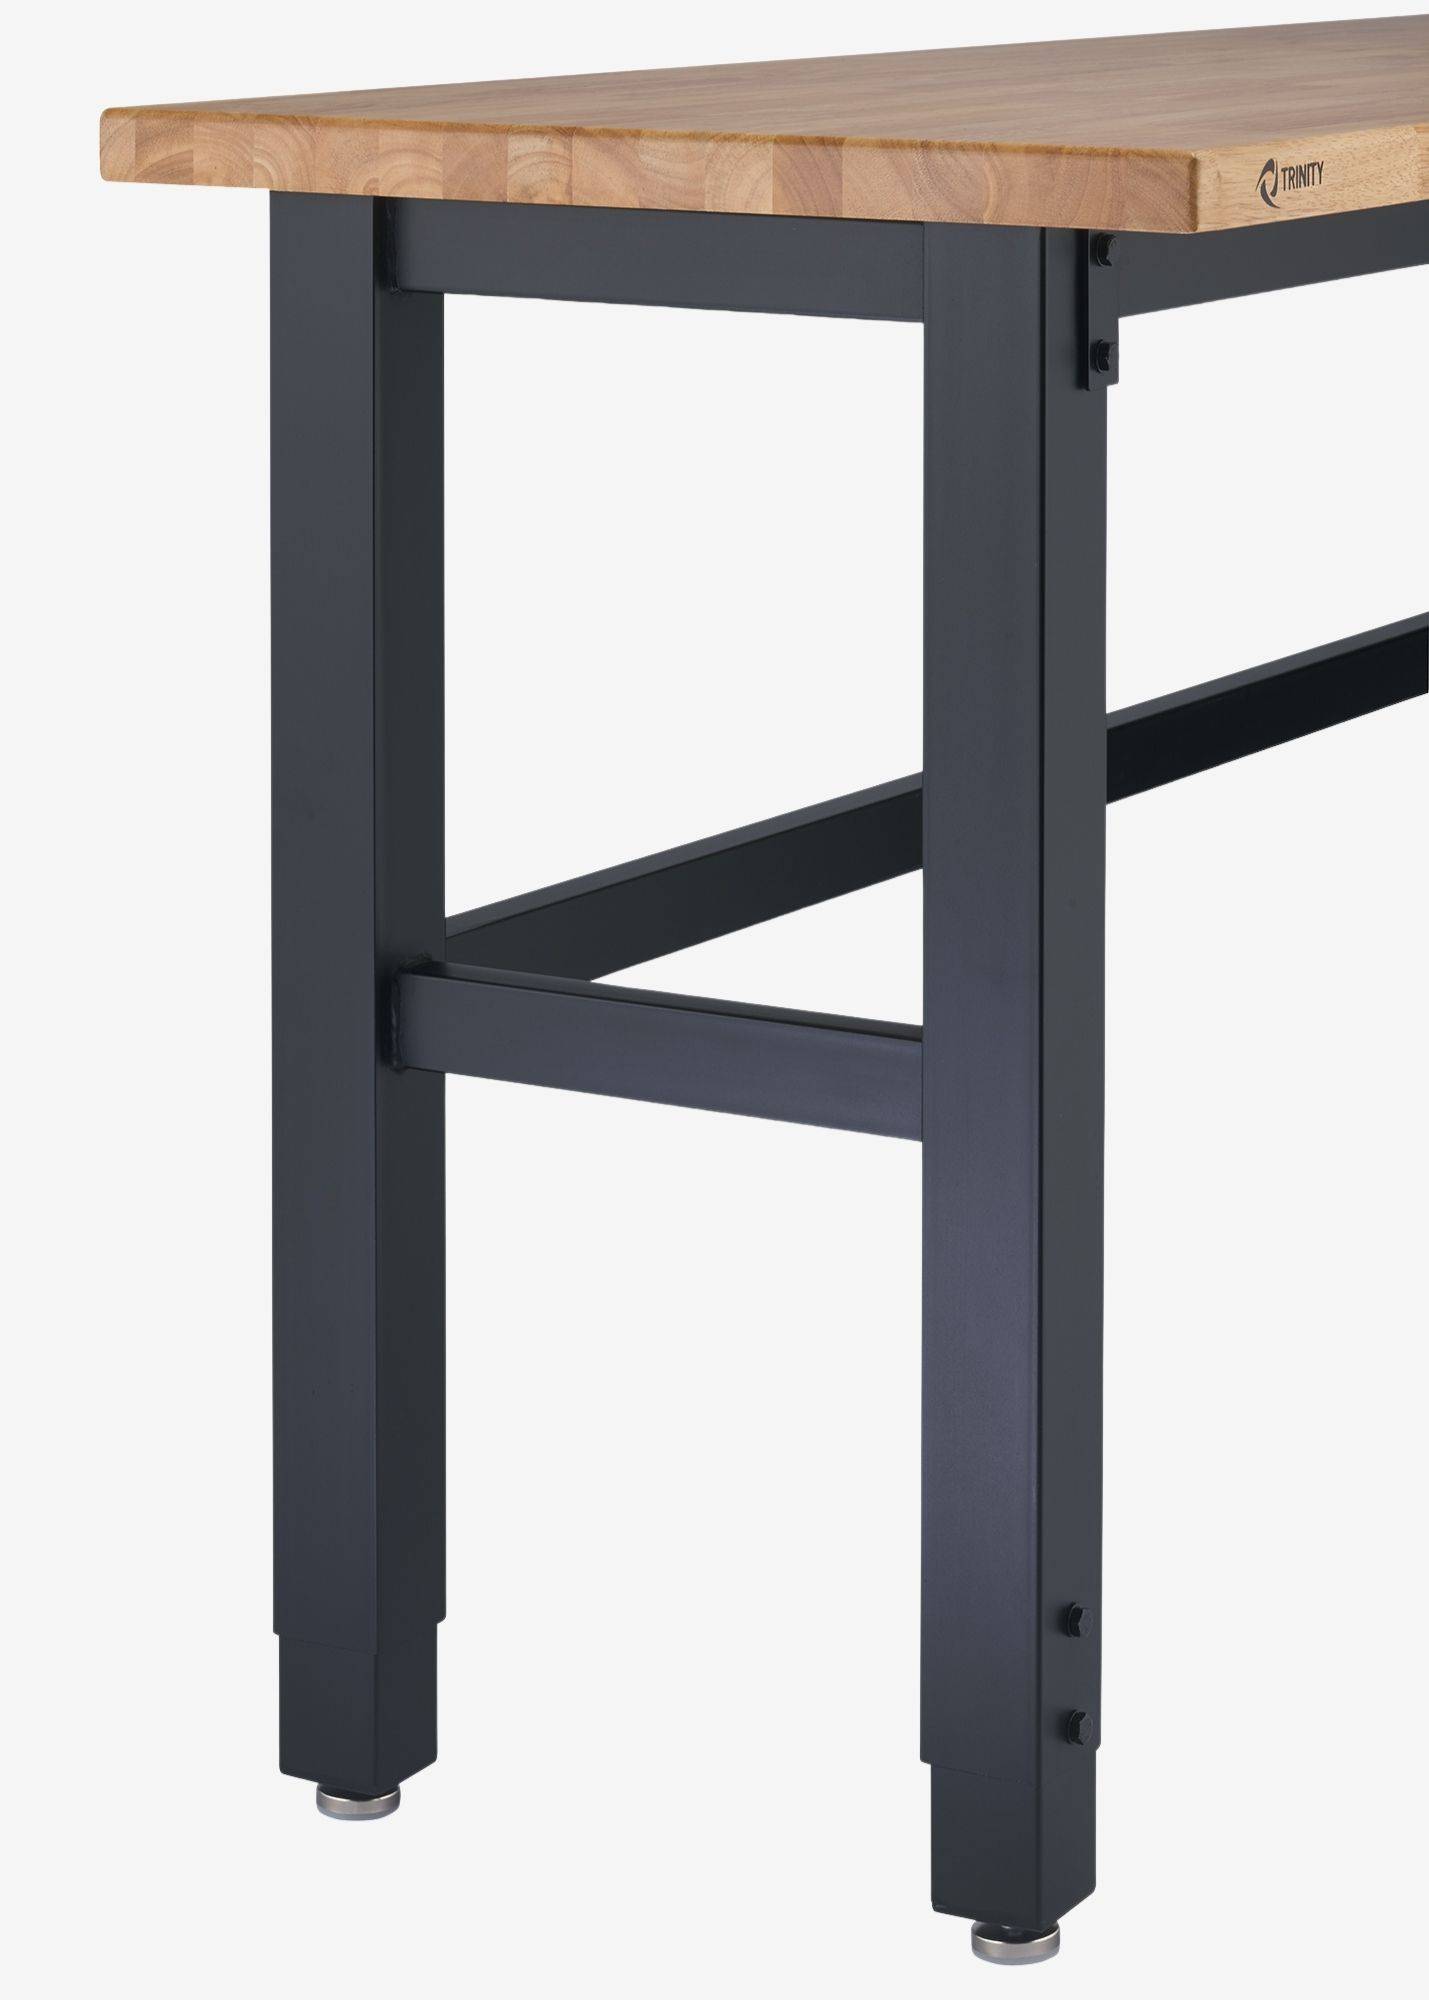 black, steel frame of the work table